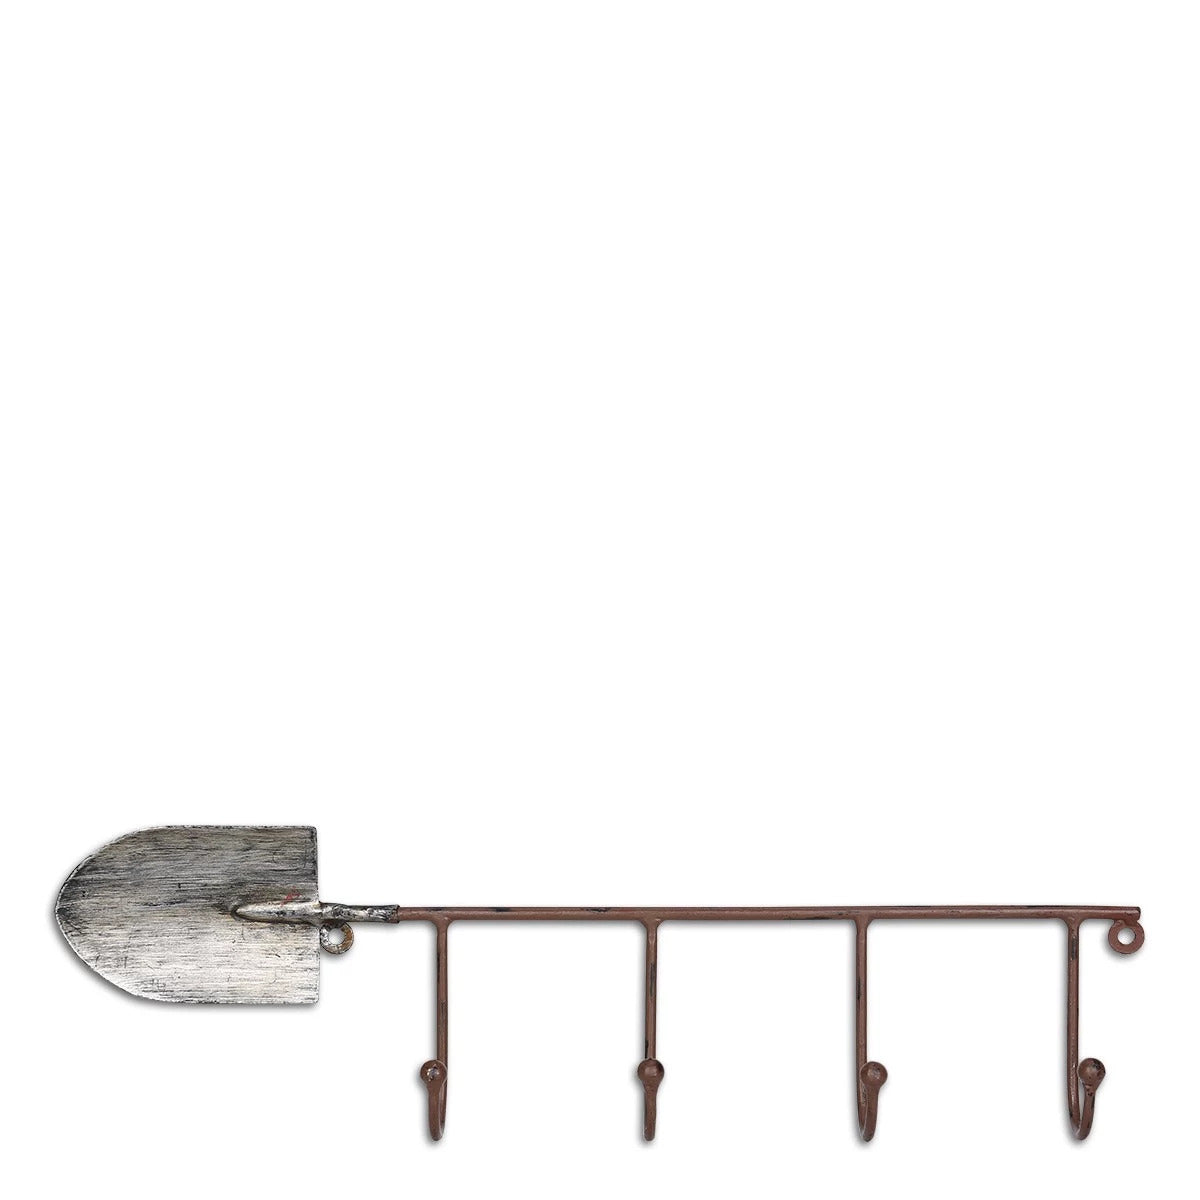 Rustic Coat Rack by Key and Clothes Holder for Wall